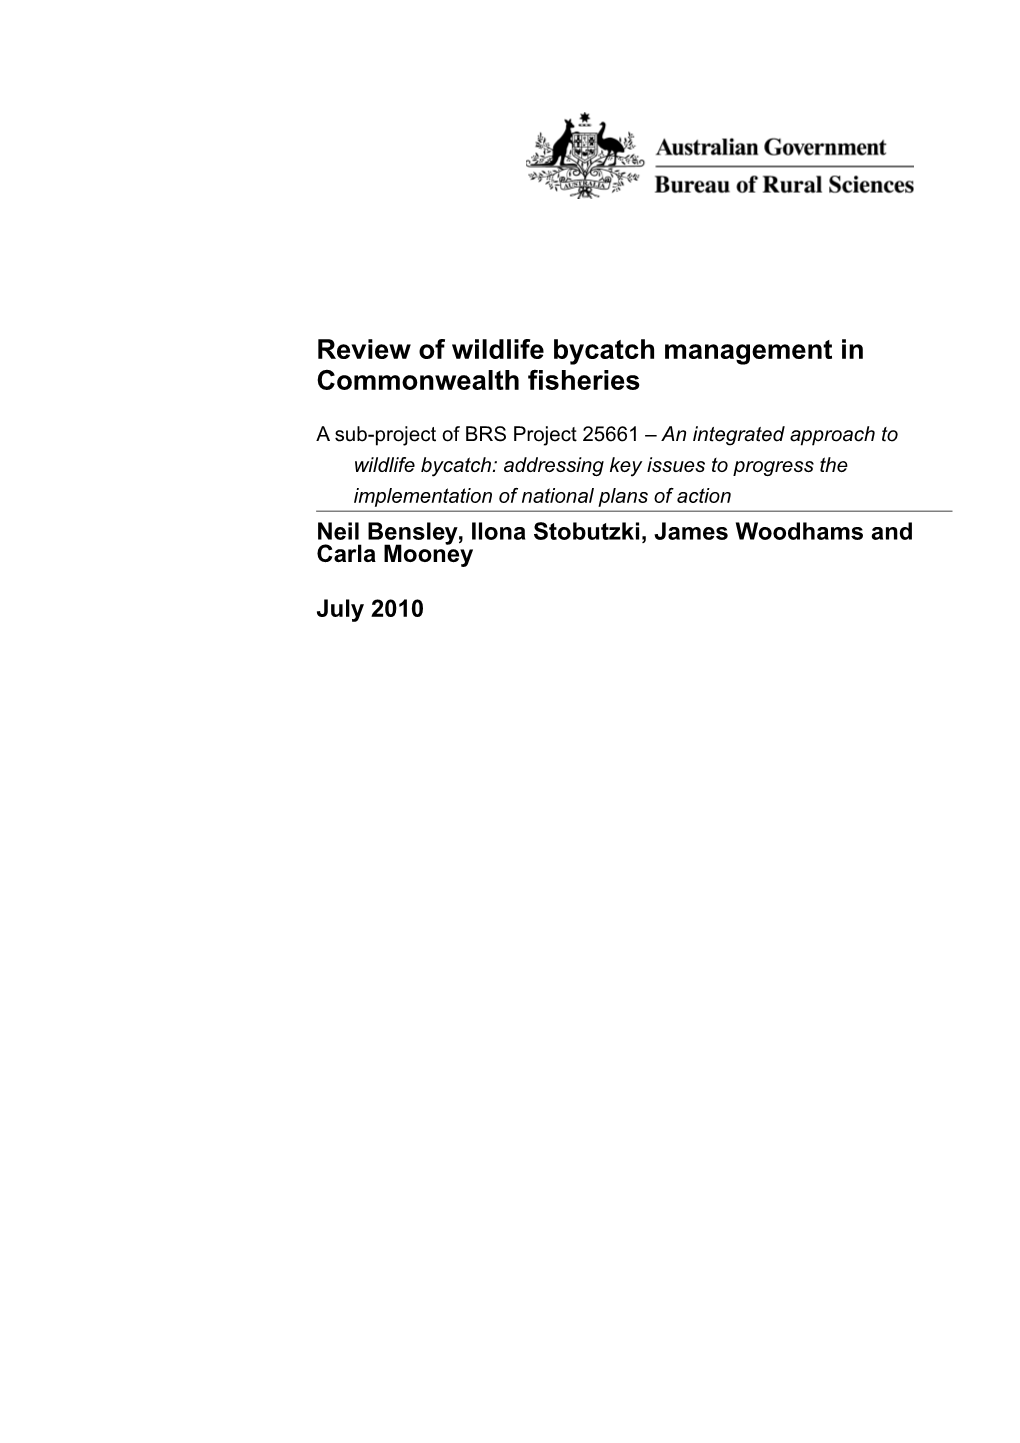 Wildlife Bycatch Management in Commonwealth Fisheries1